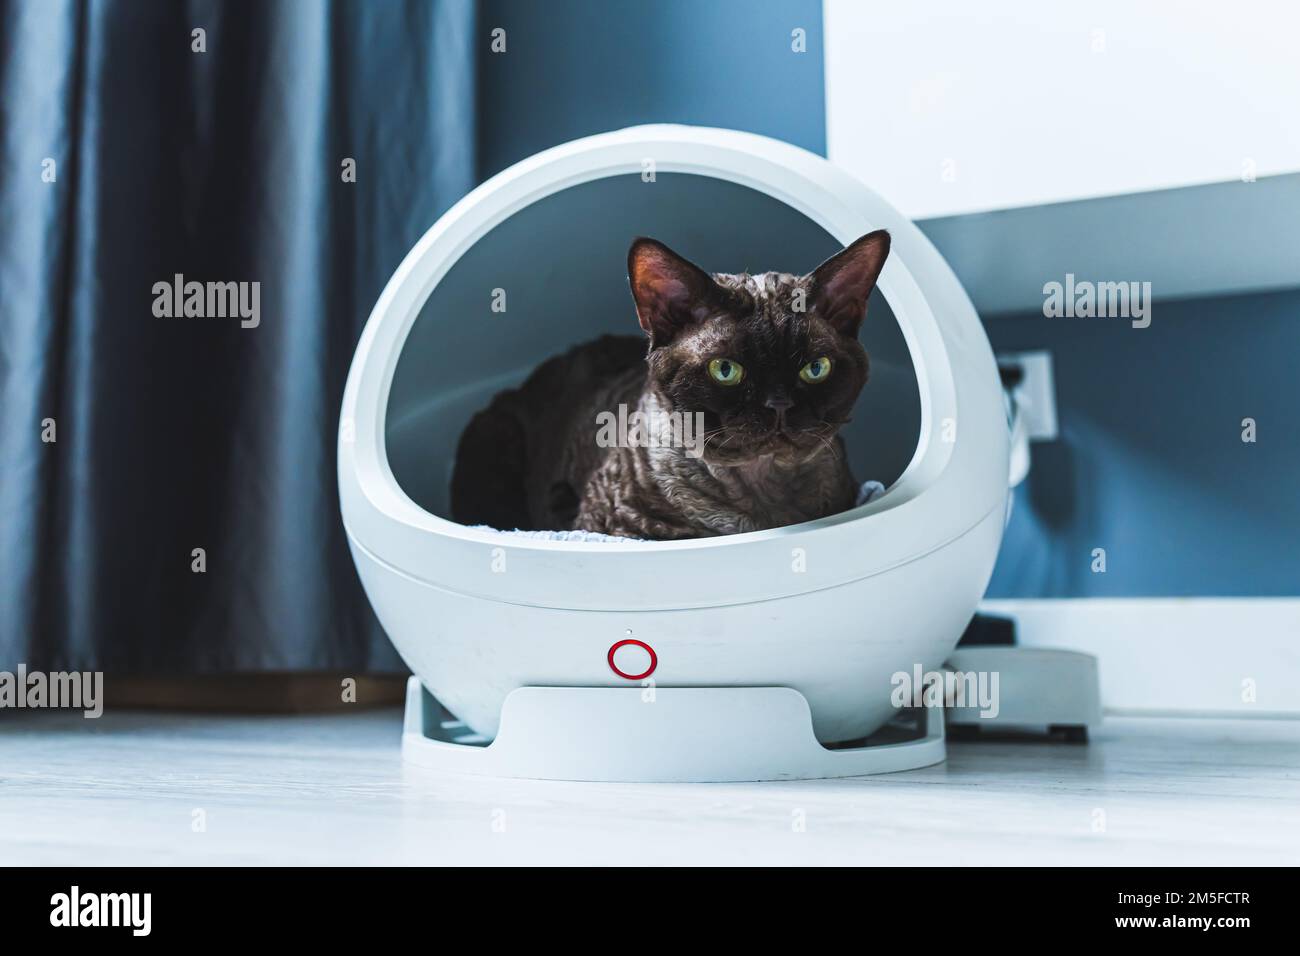 Medium shot of a cat lying in a heating capsule standing on the floor. High quality photo Stock Photo